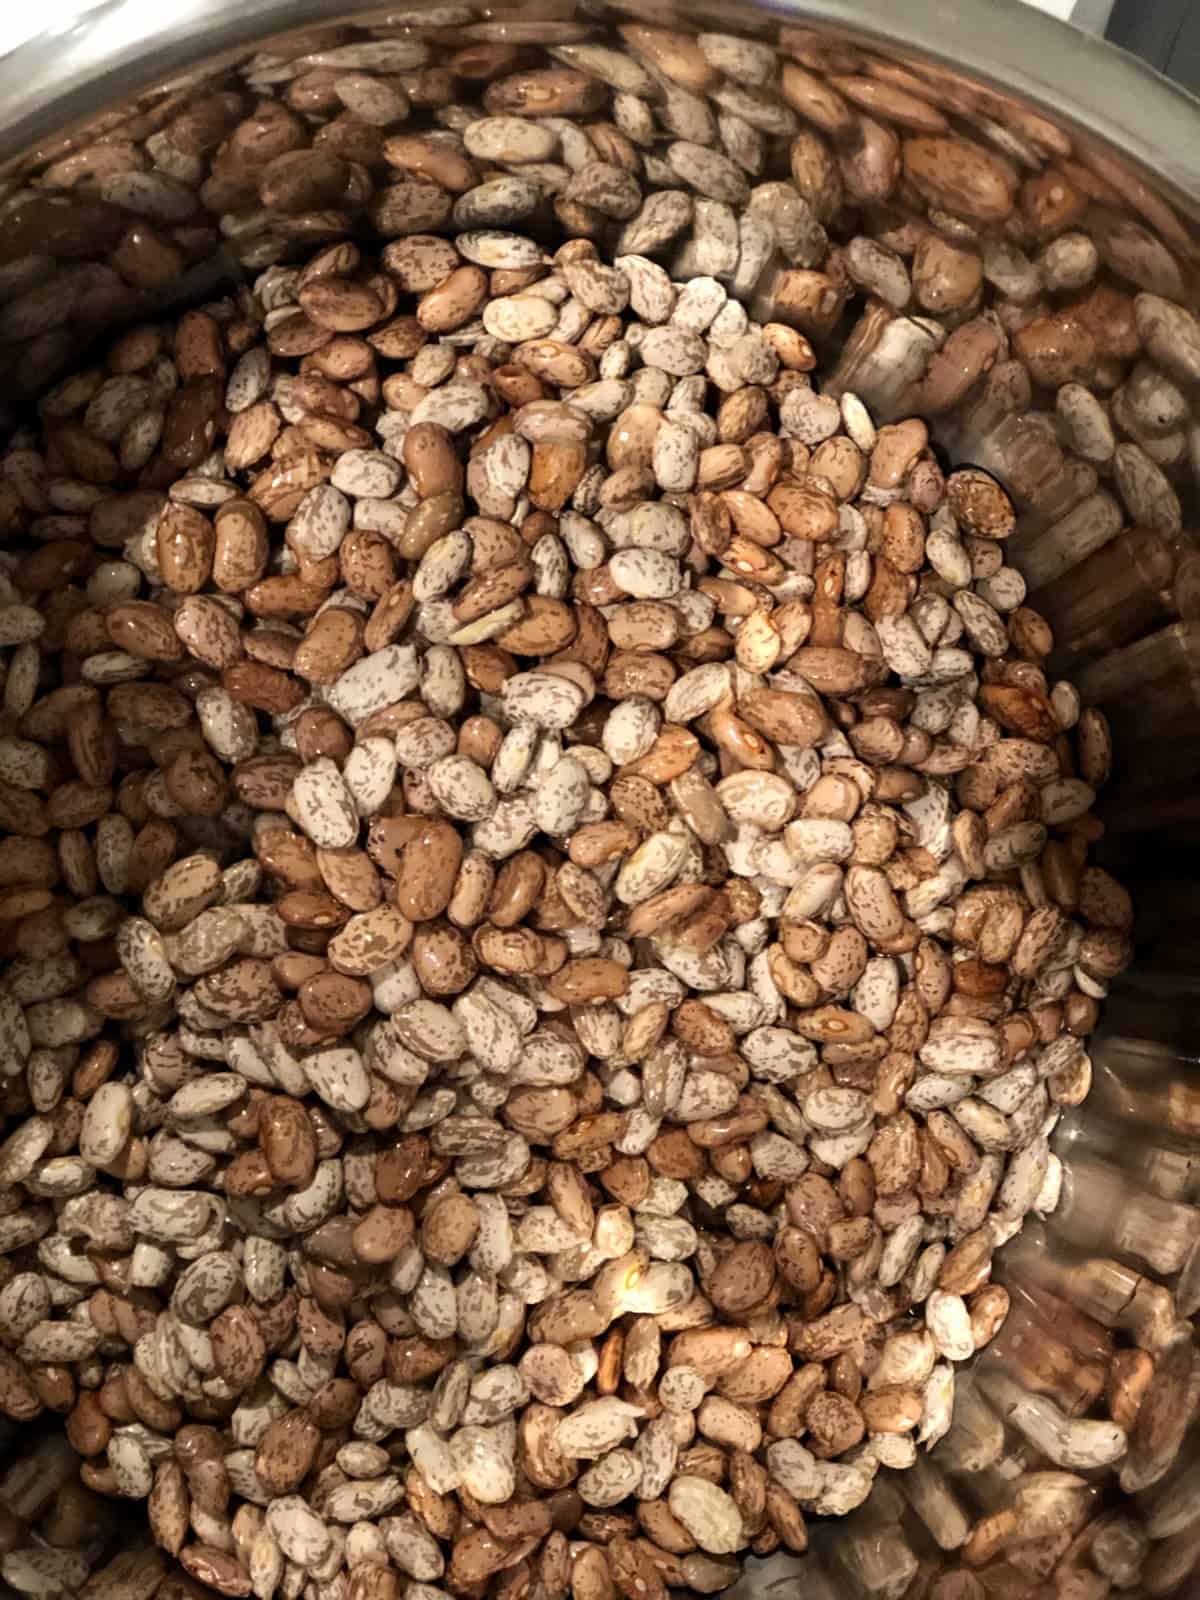 Uncooked pinto beans in InstantPot electric pressure cooker